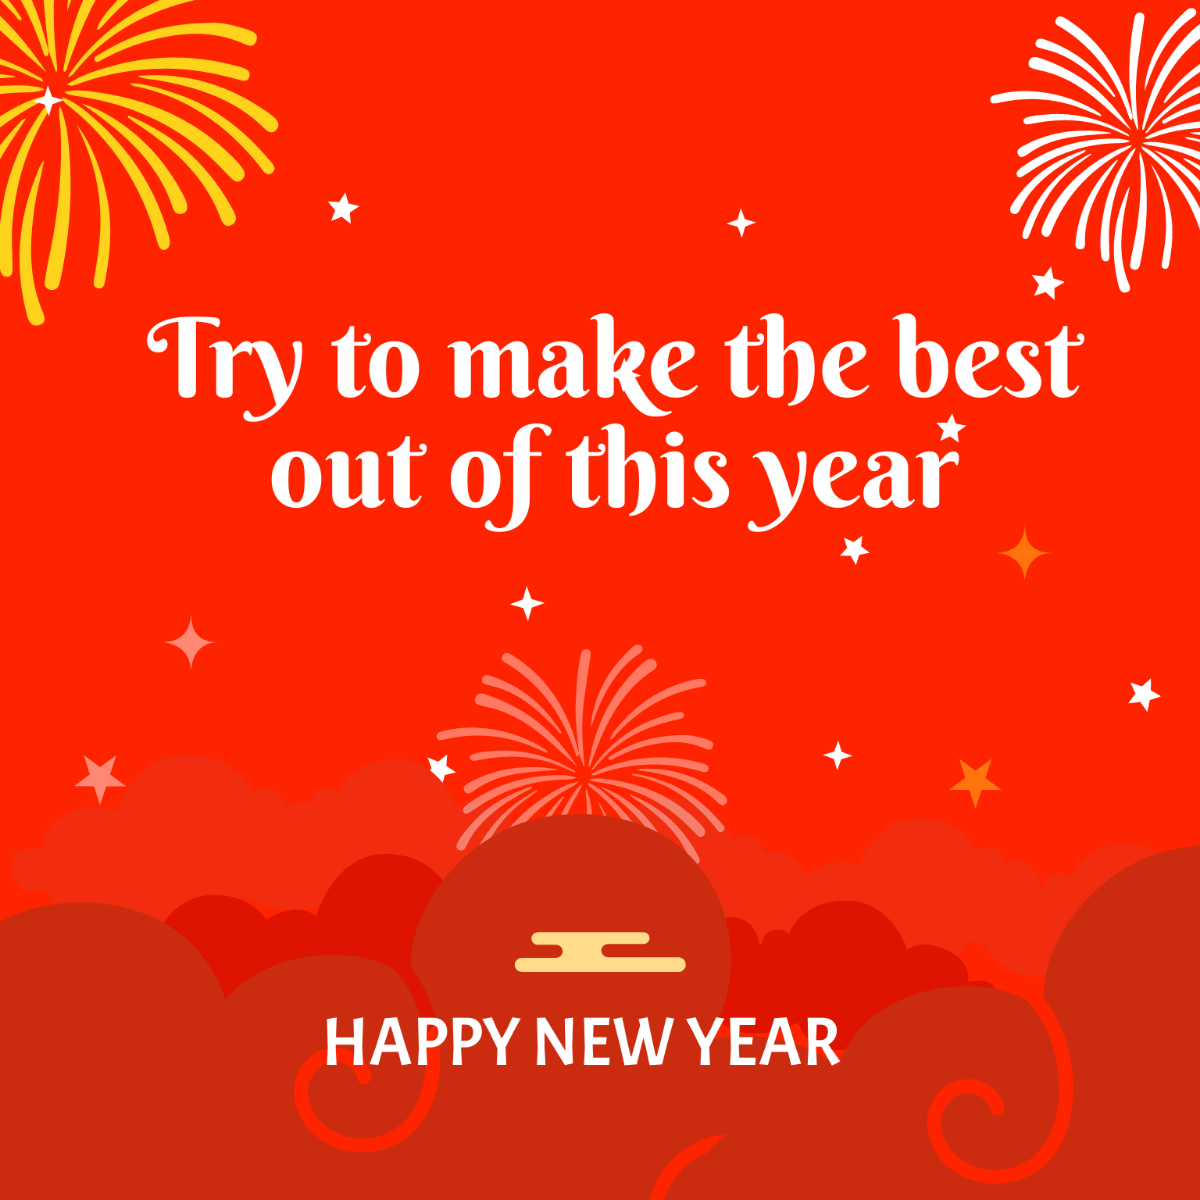 New Year's Day Wishes Vector Template